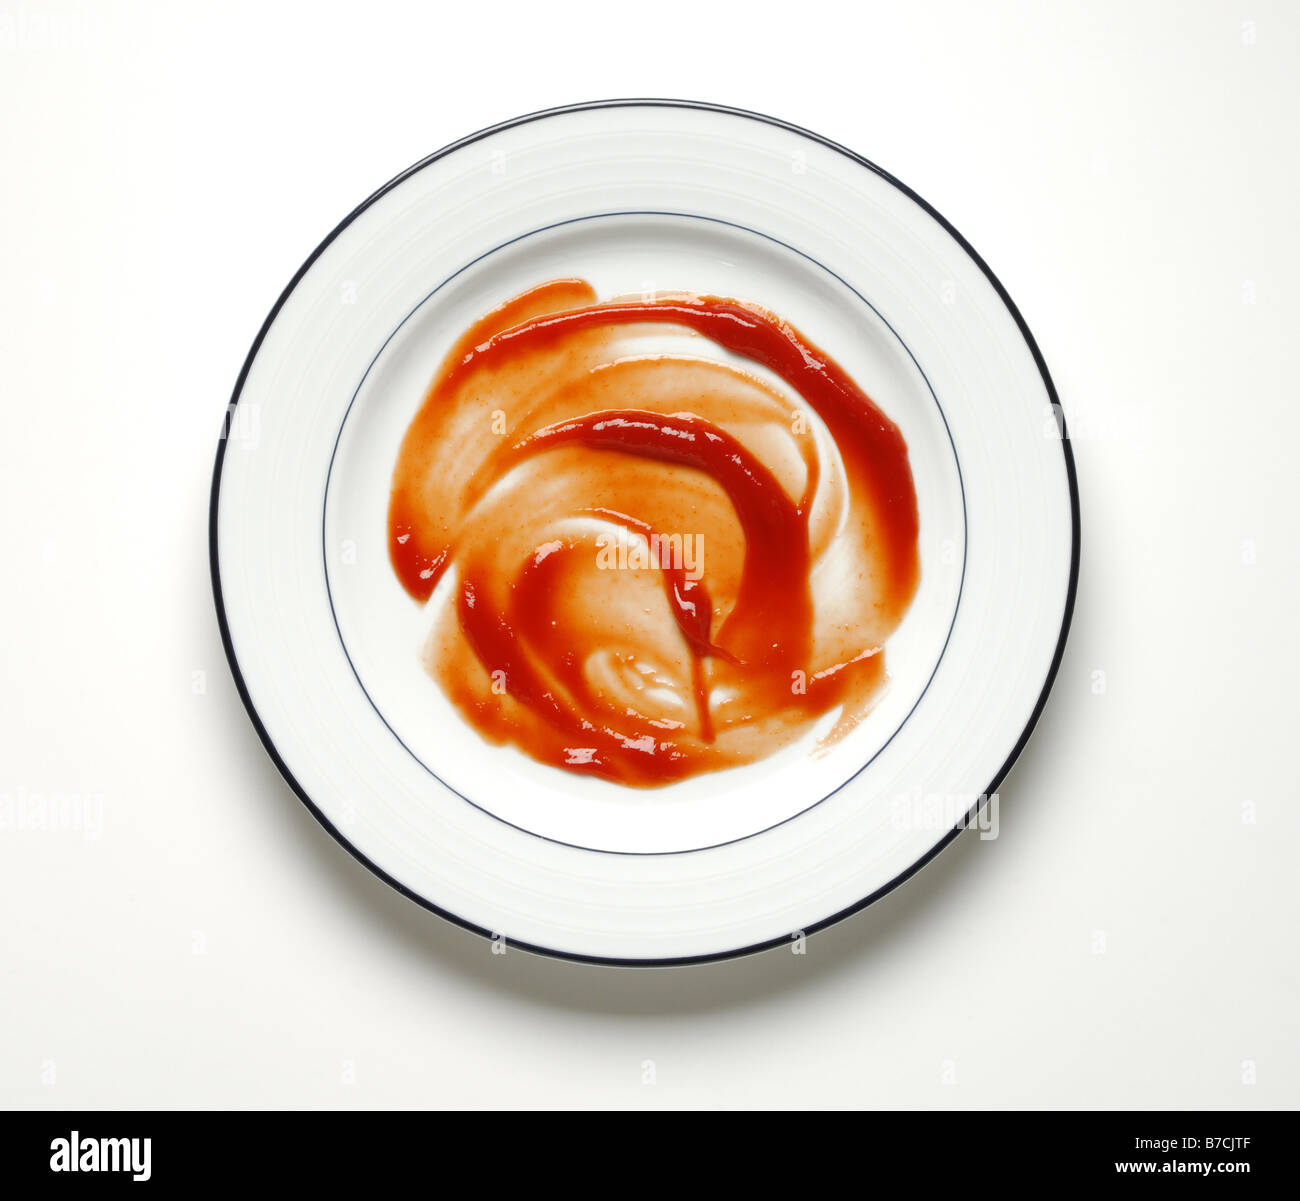 Red ketchup smeared on a round dinner plate Stock Photo